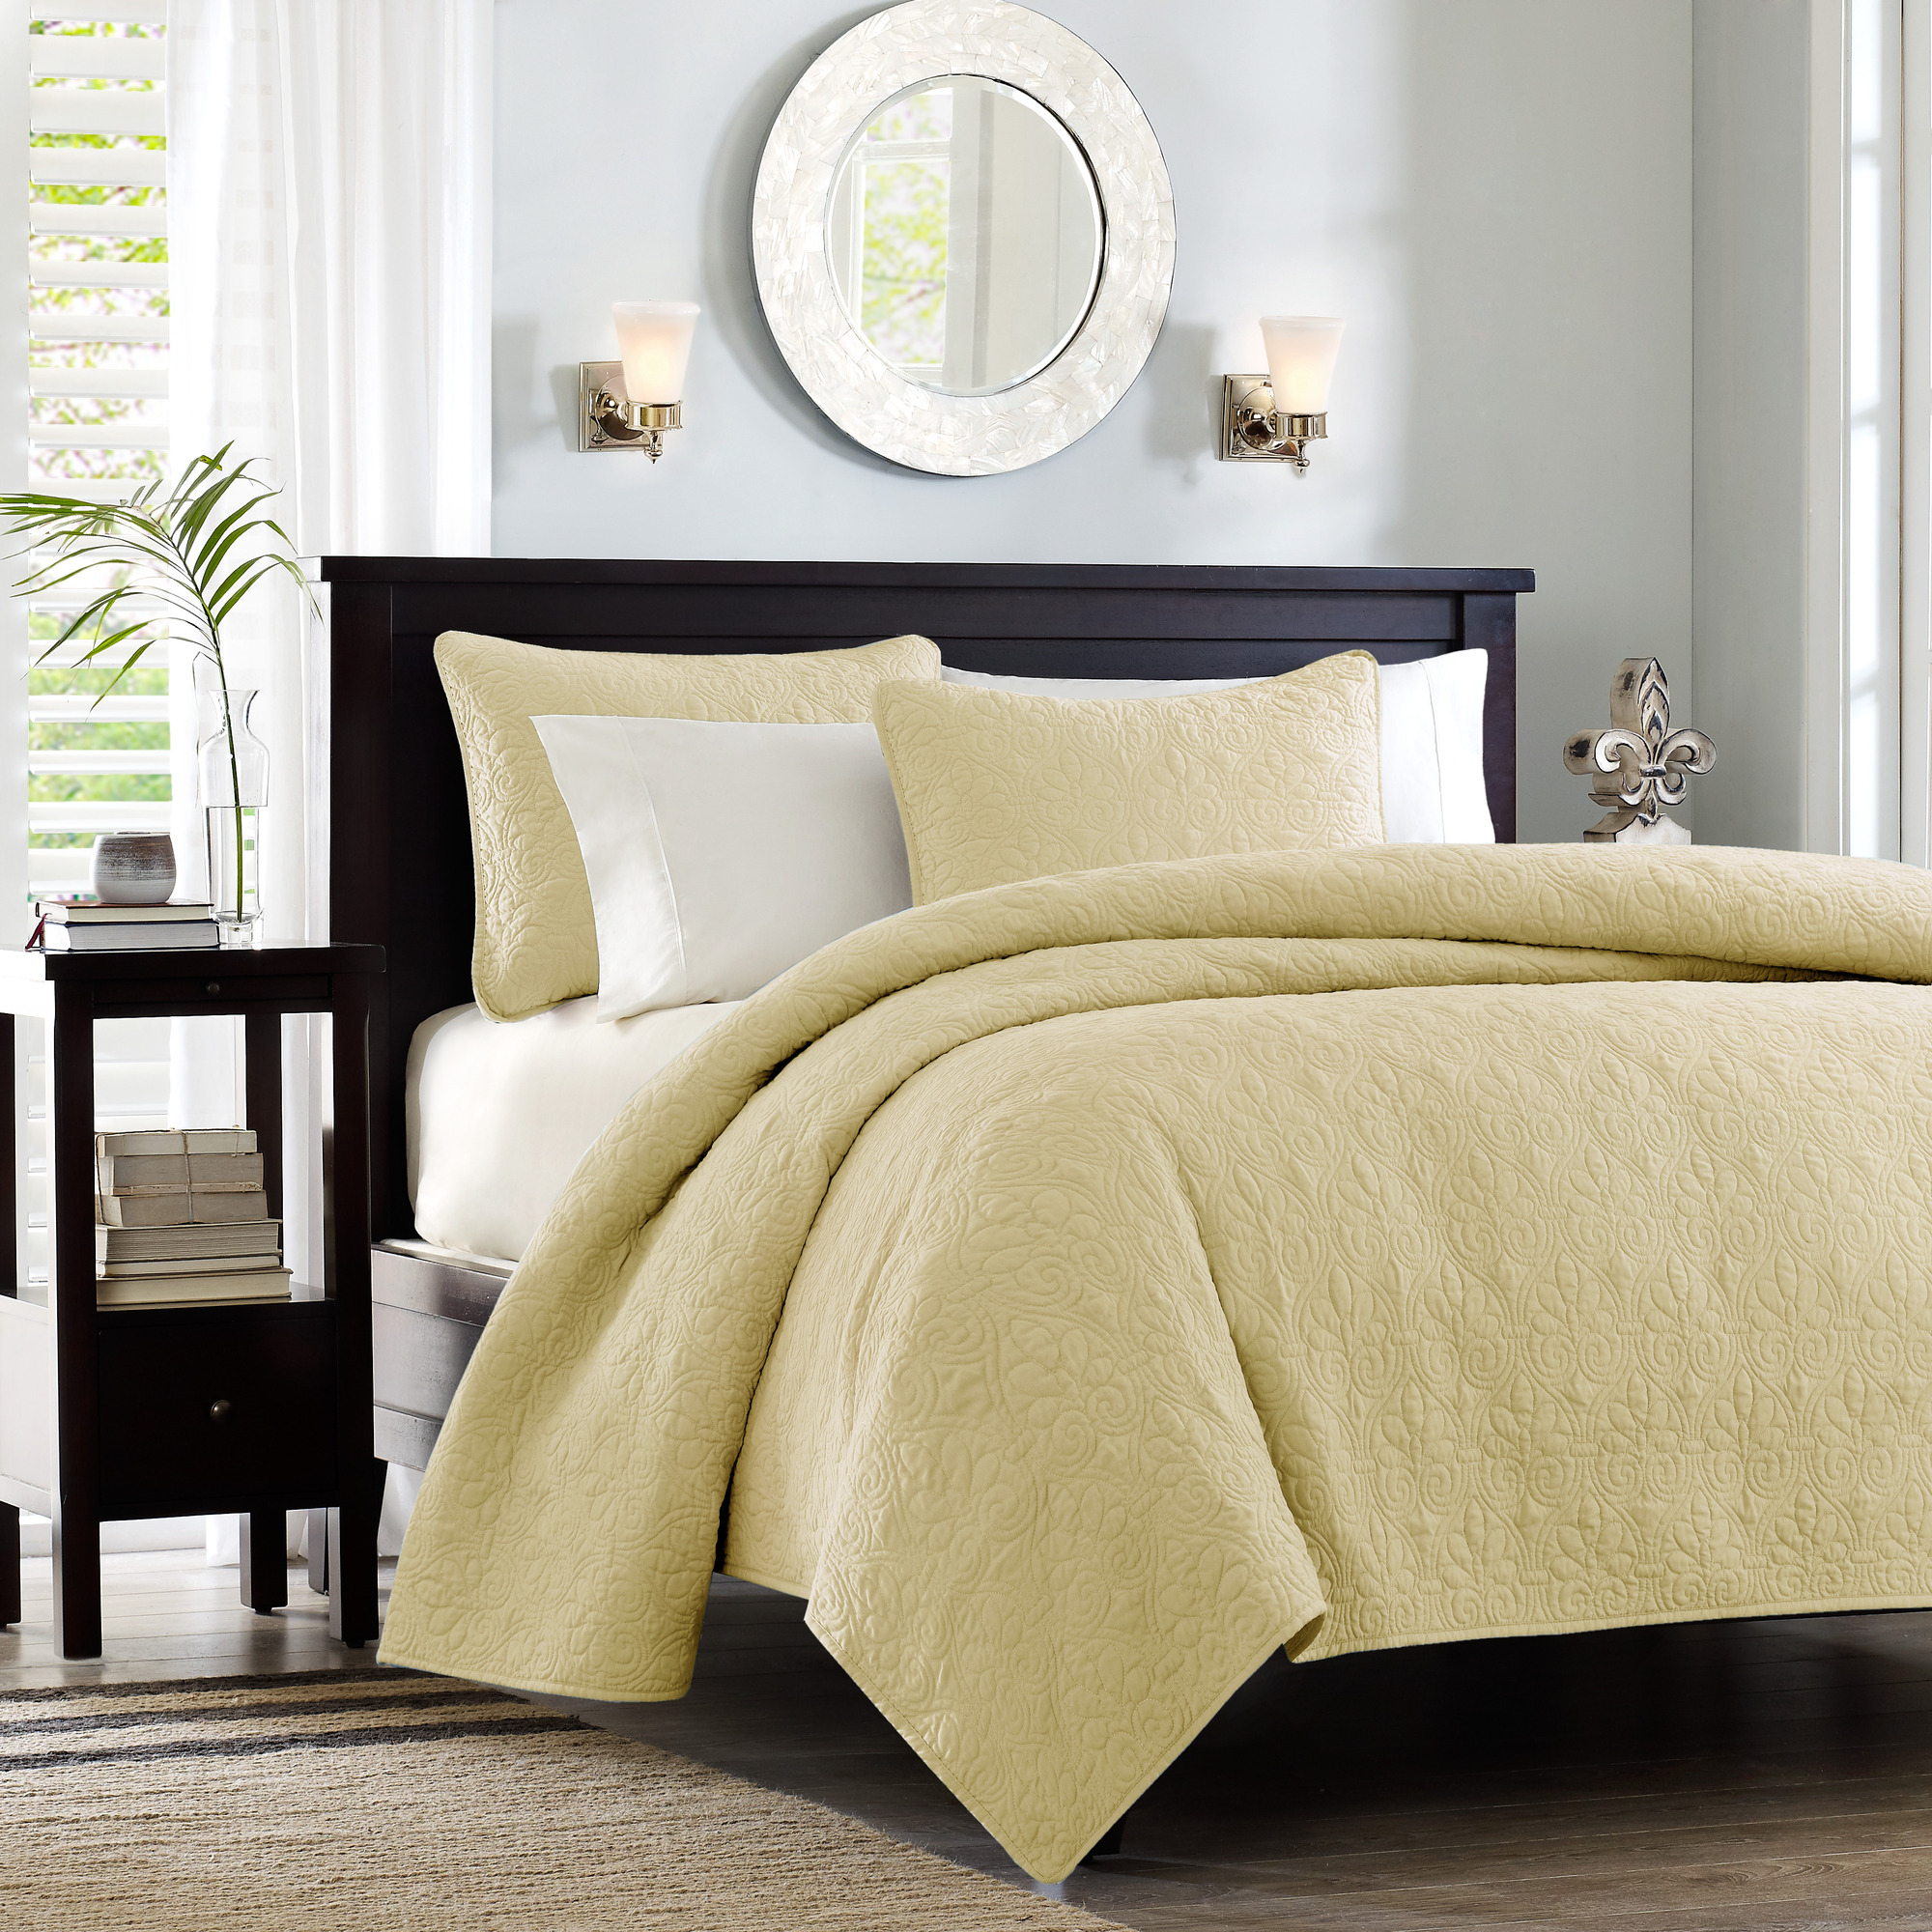 Home Essence Vancouver Super Soft Reversible Coverlet Set, King/Cal King, Yellow - image 1 of 14